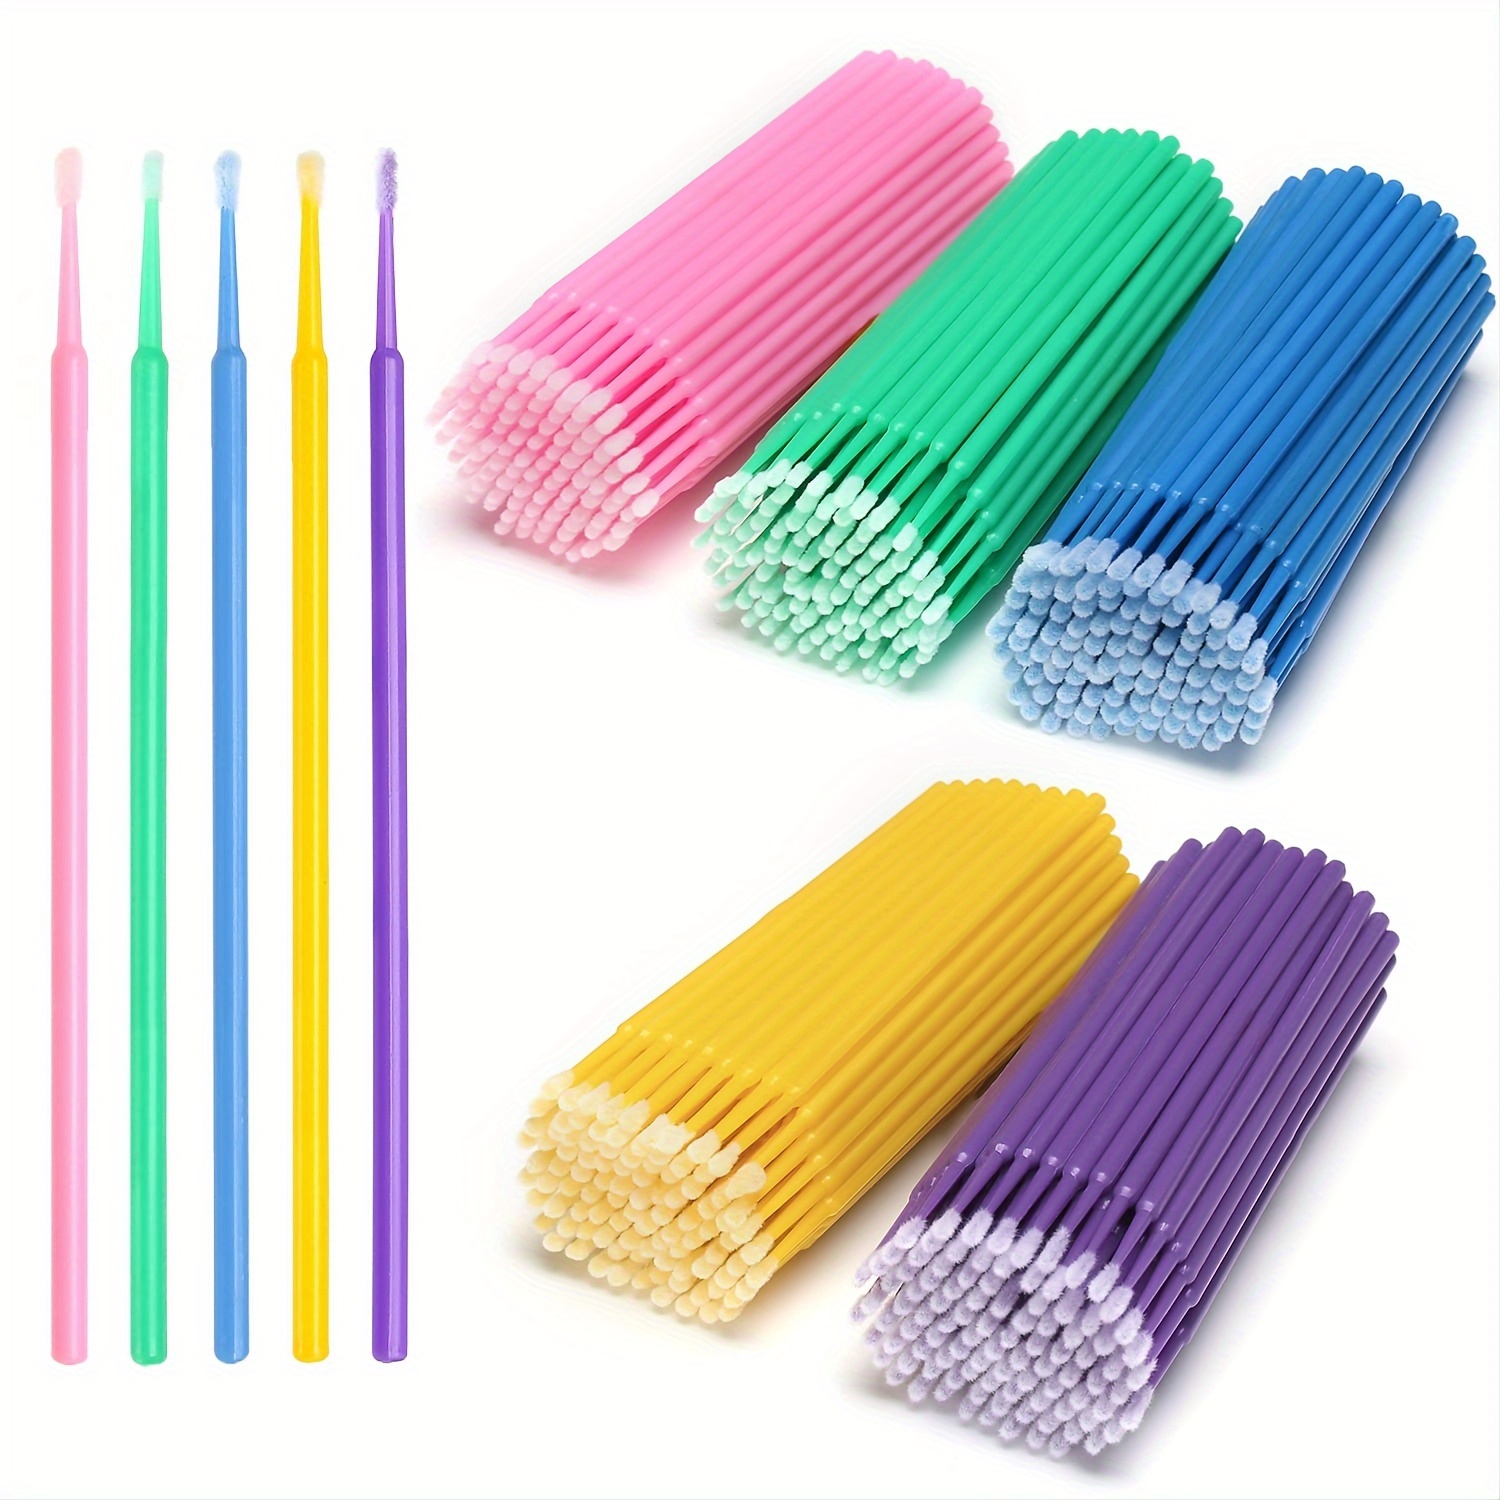 

100 Pcs/pack Micro Applicators Brushes For Eyelash Extensions, Makeup, And Lash Cleaning - Mini Cotton Swabs For Easy And Precise Application Of Grafted Eyelash Glue